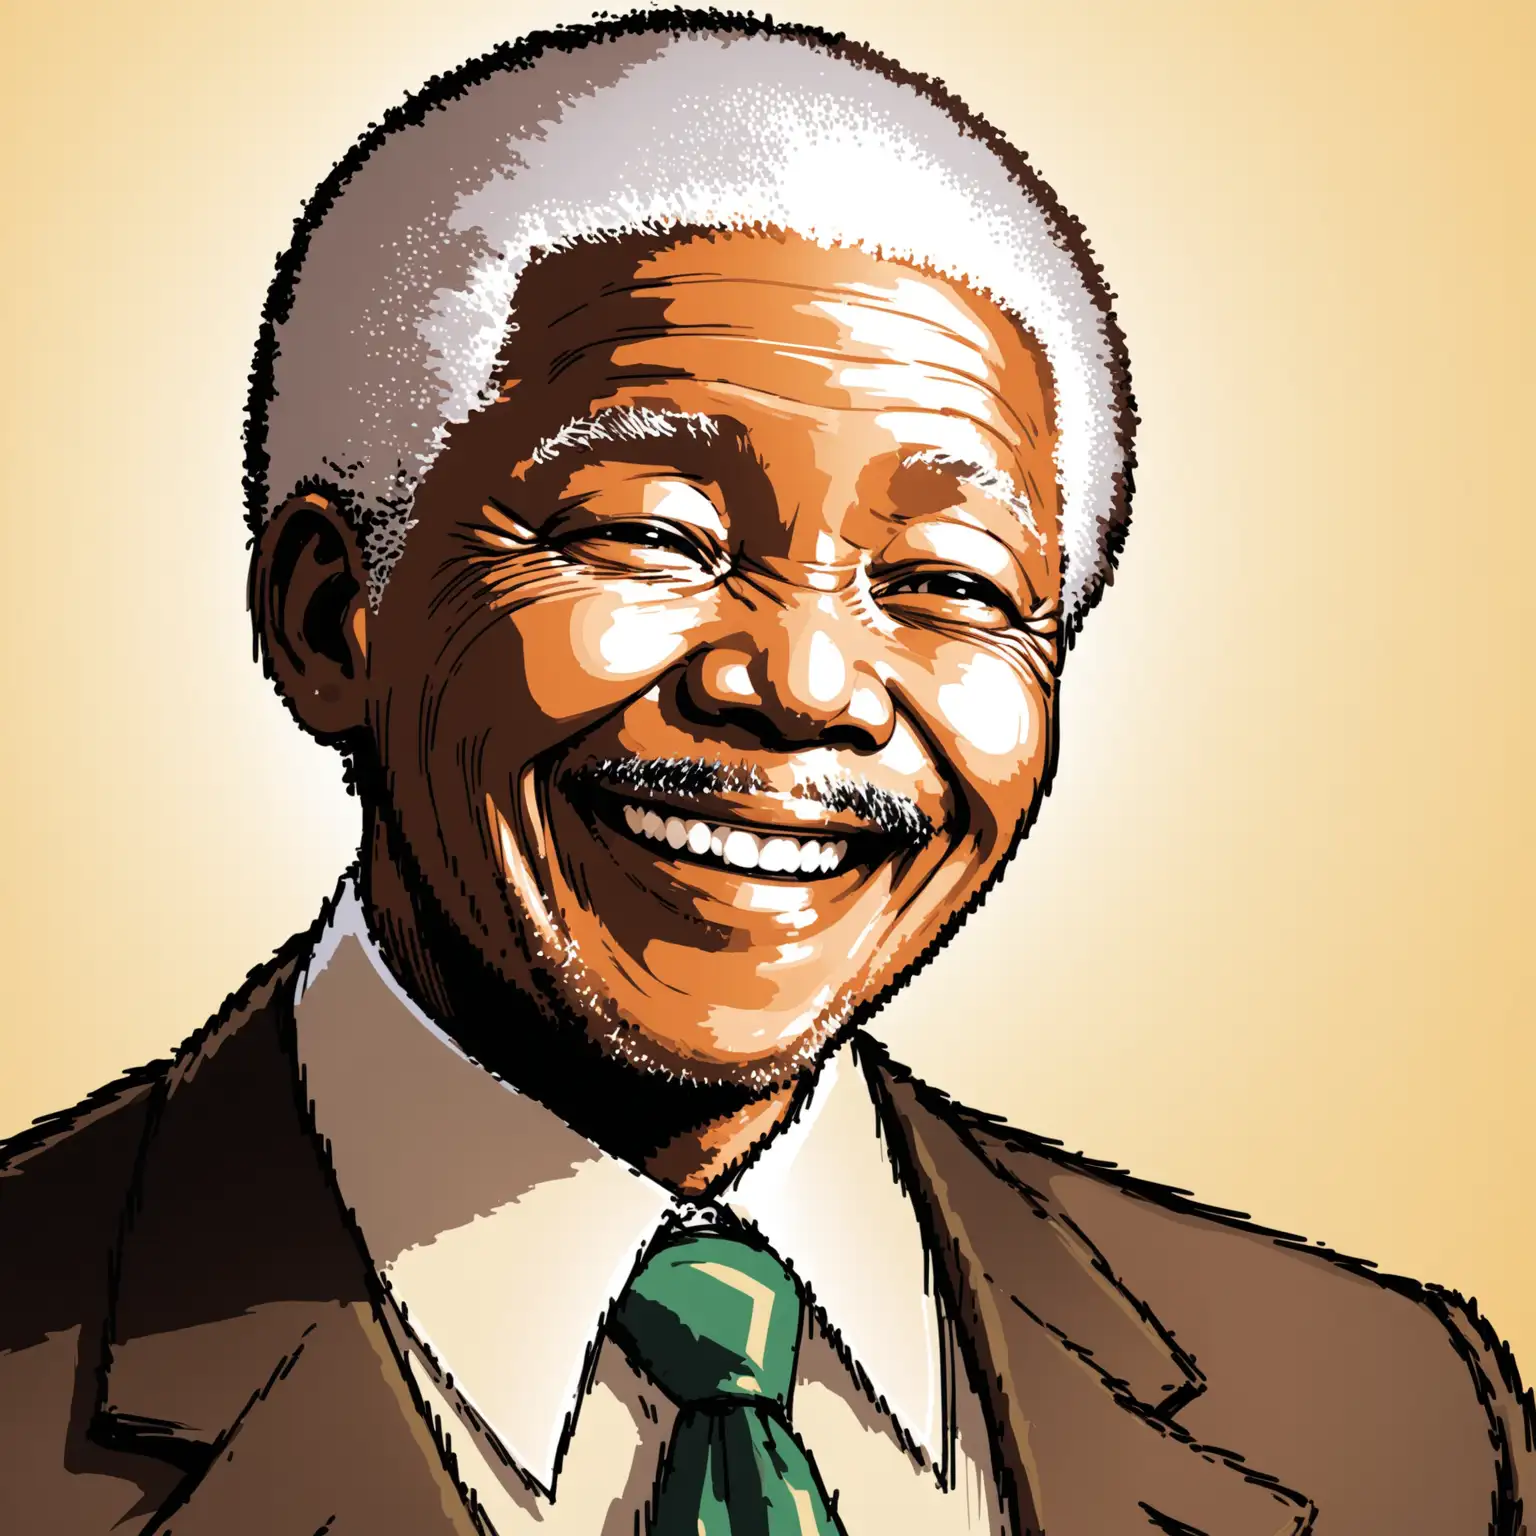 Nelson Mandela Smiling and Looking Forward